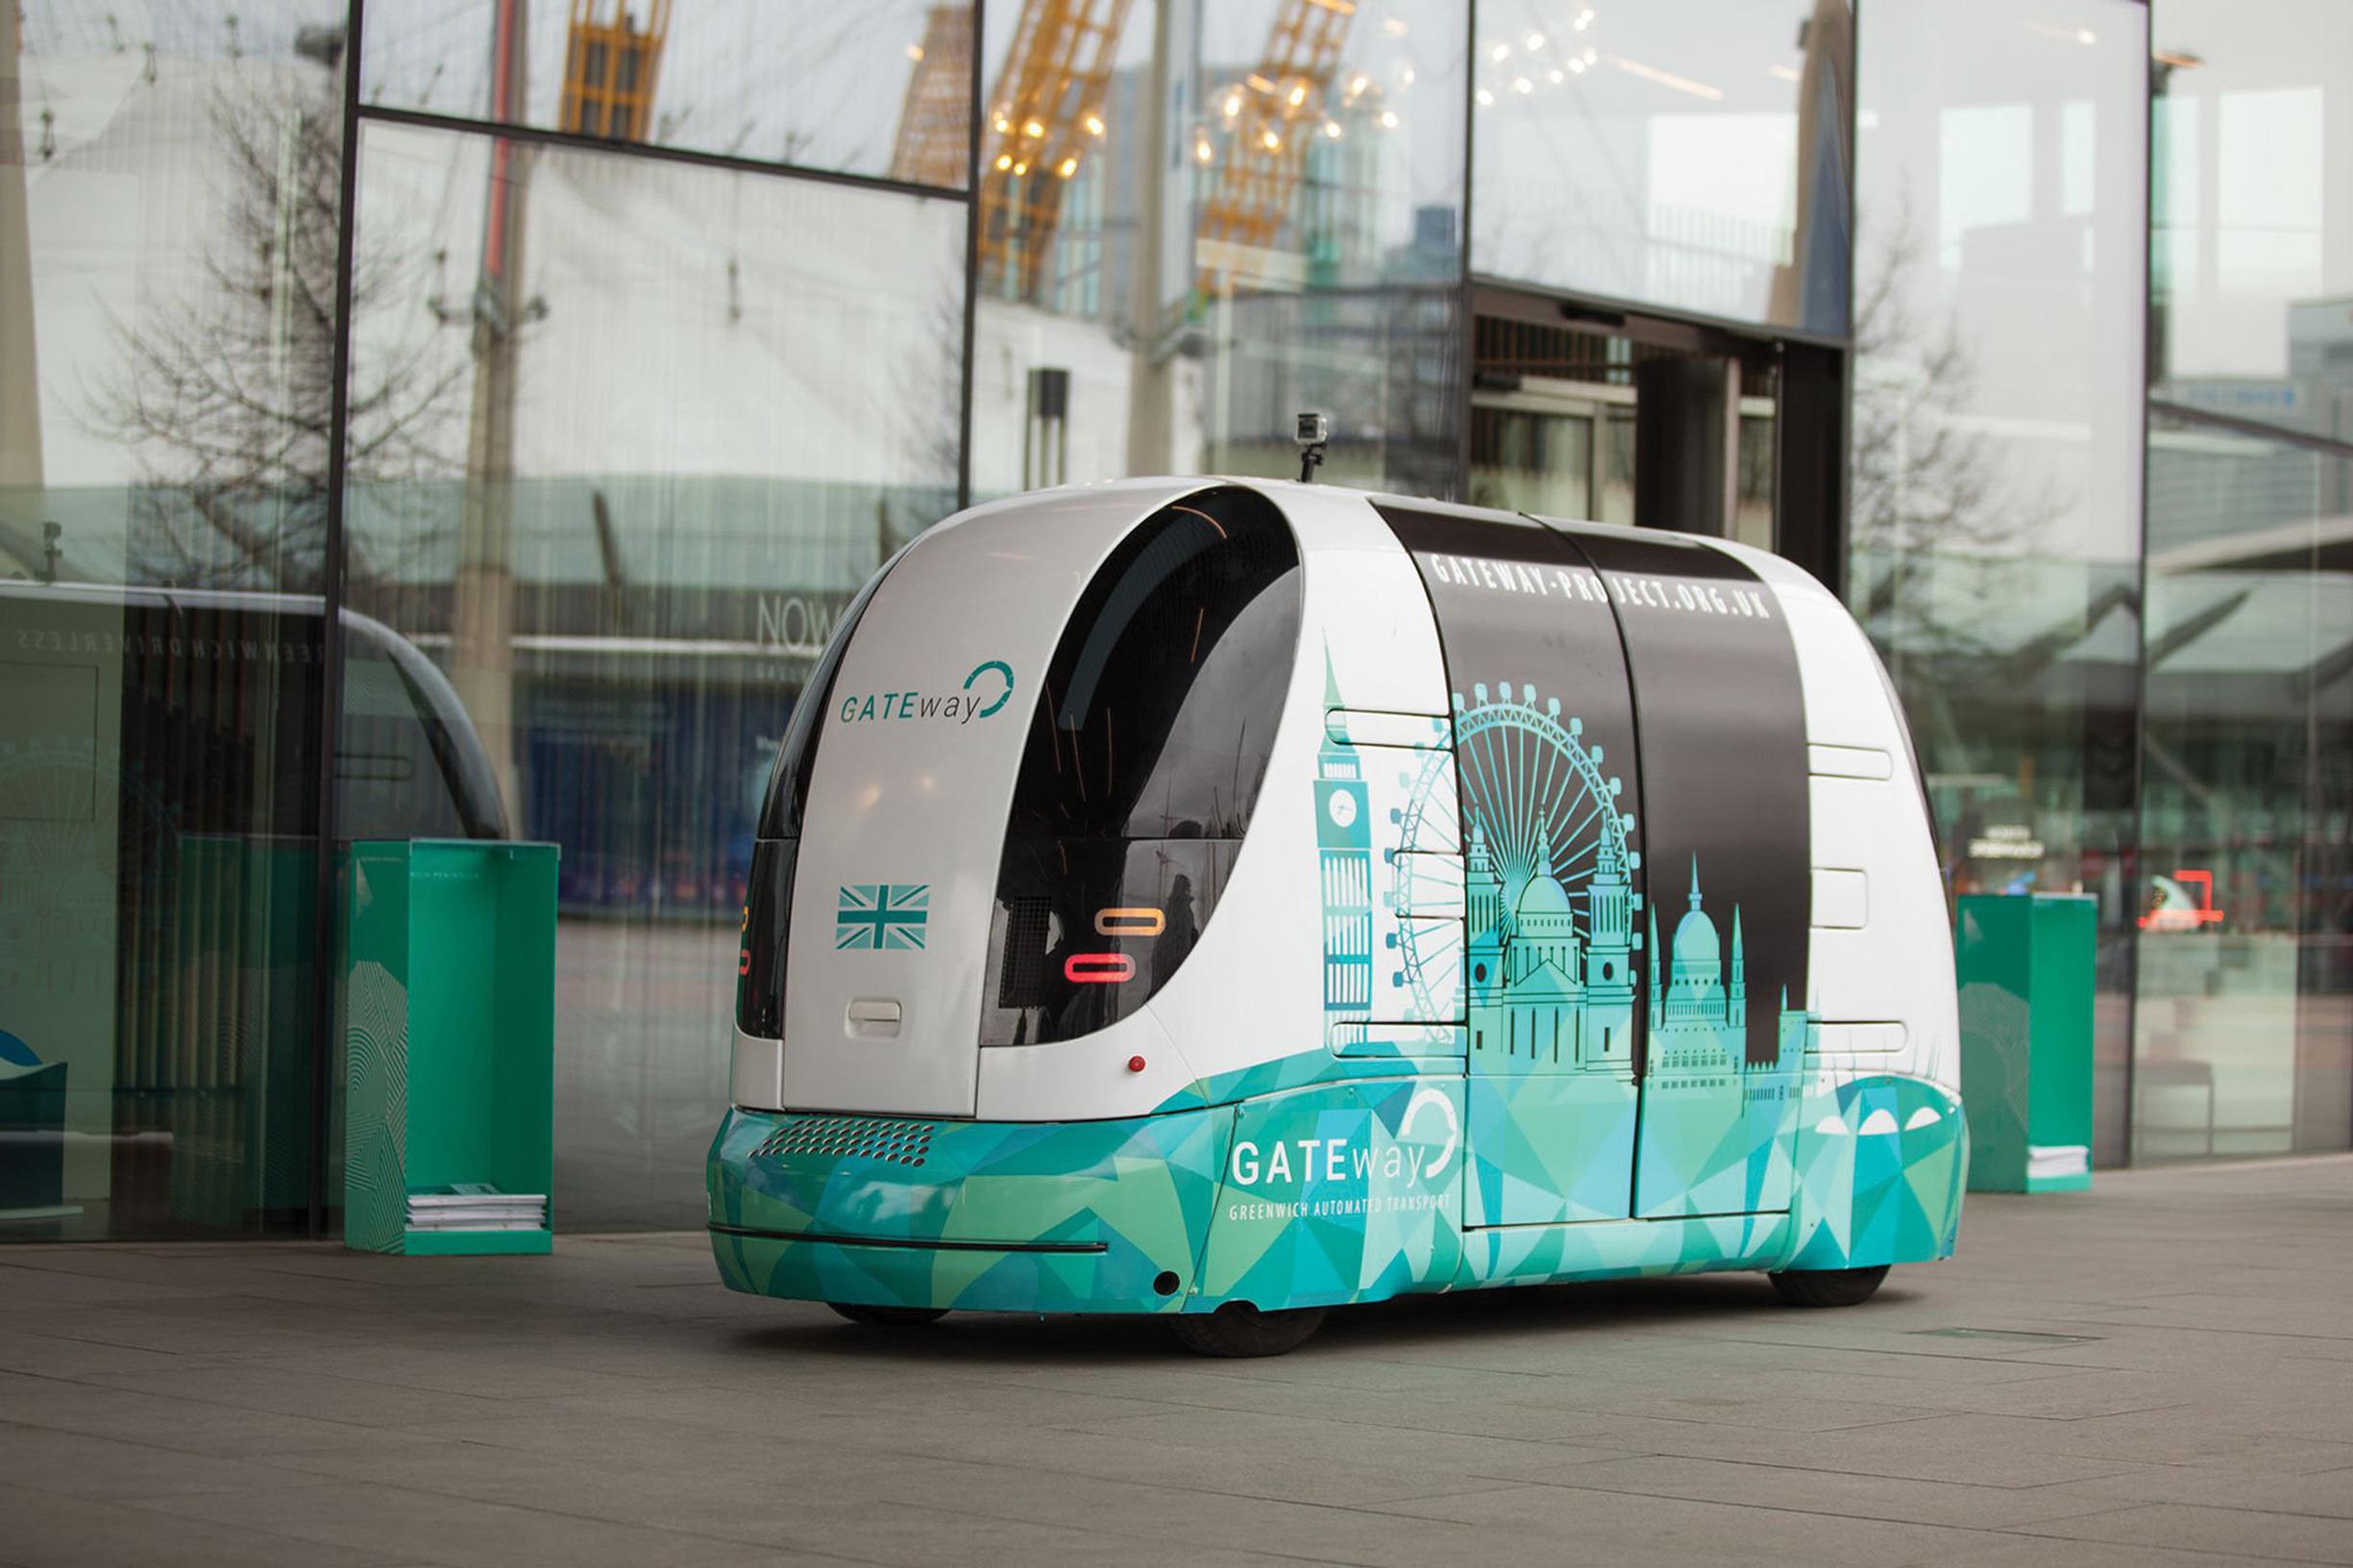 GATEway is an £8m research project, led by TRL, to understand and overcome the challenges of implementing automated vehicles in an urban environment